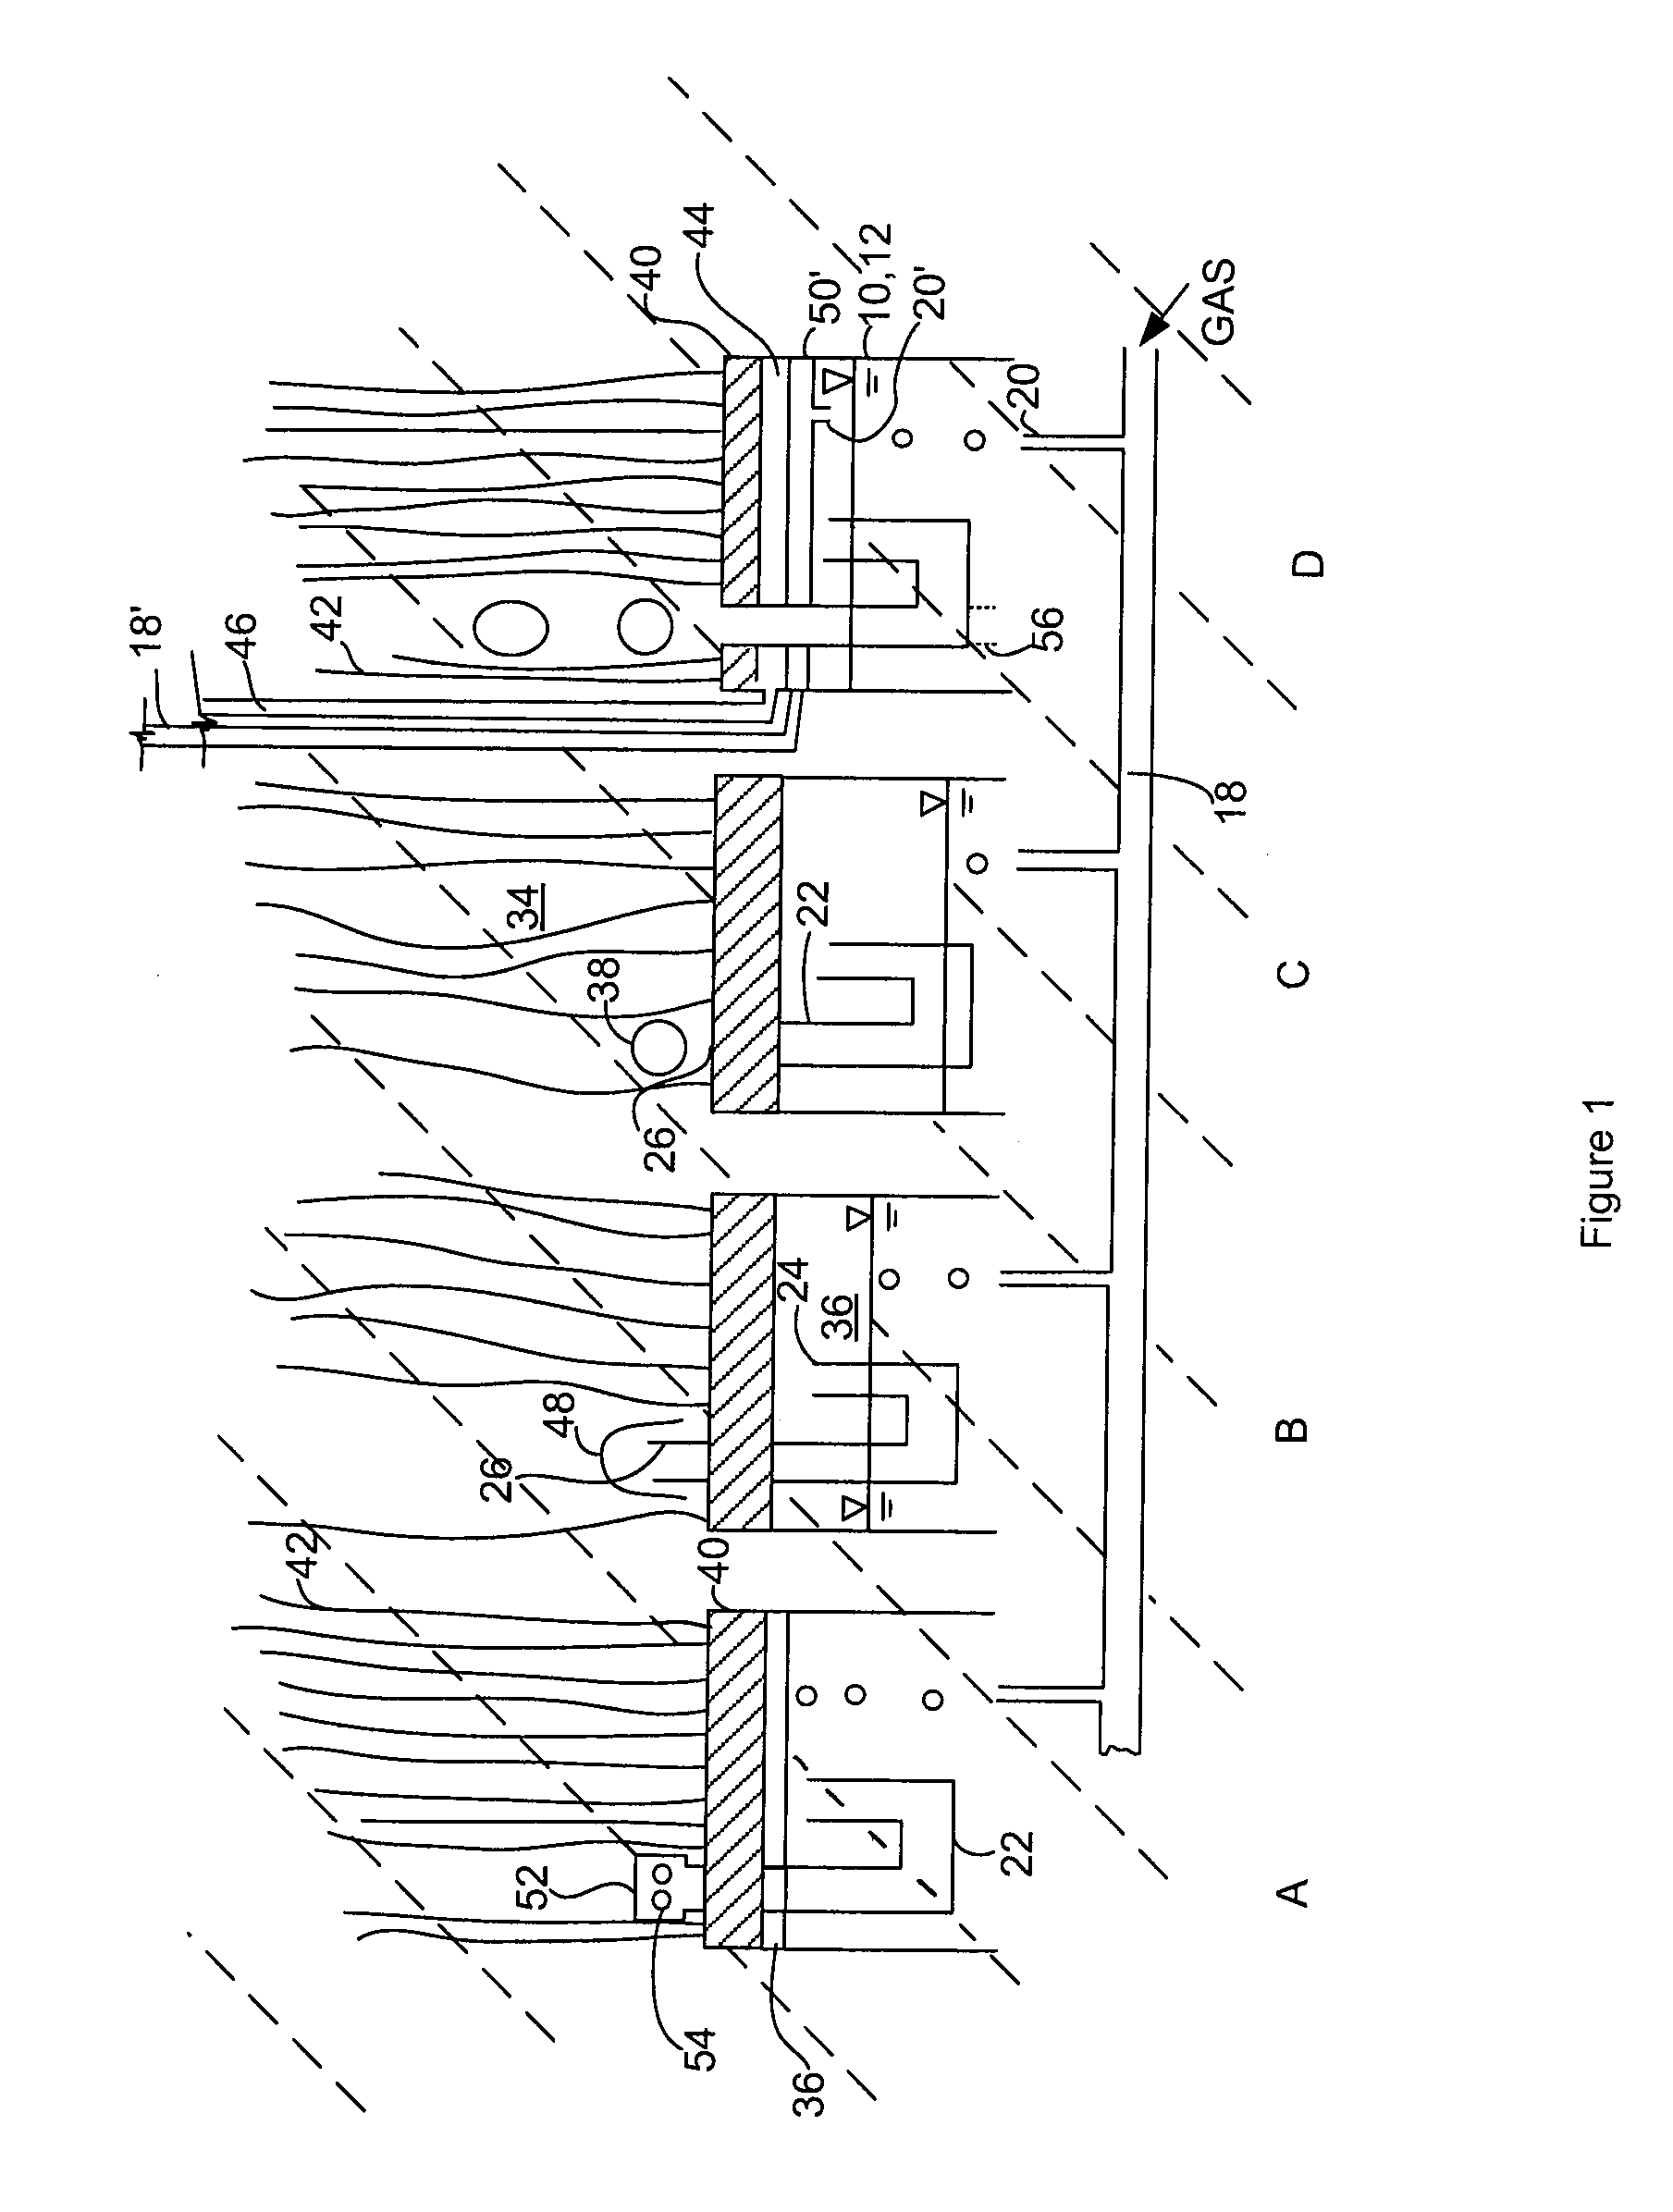 Integrated gas sparger for an immersed membrane